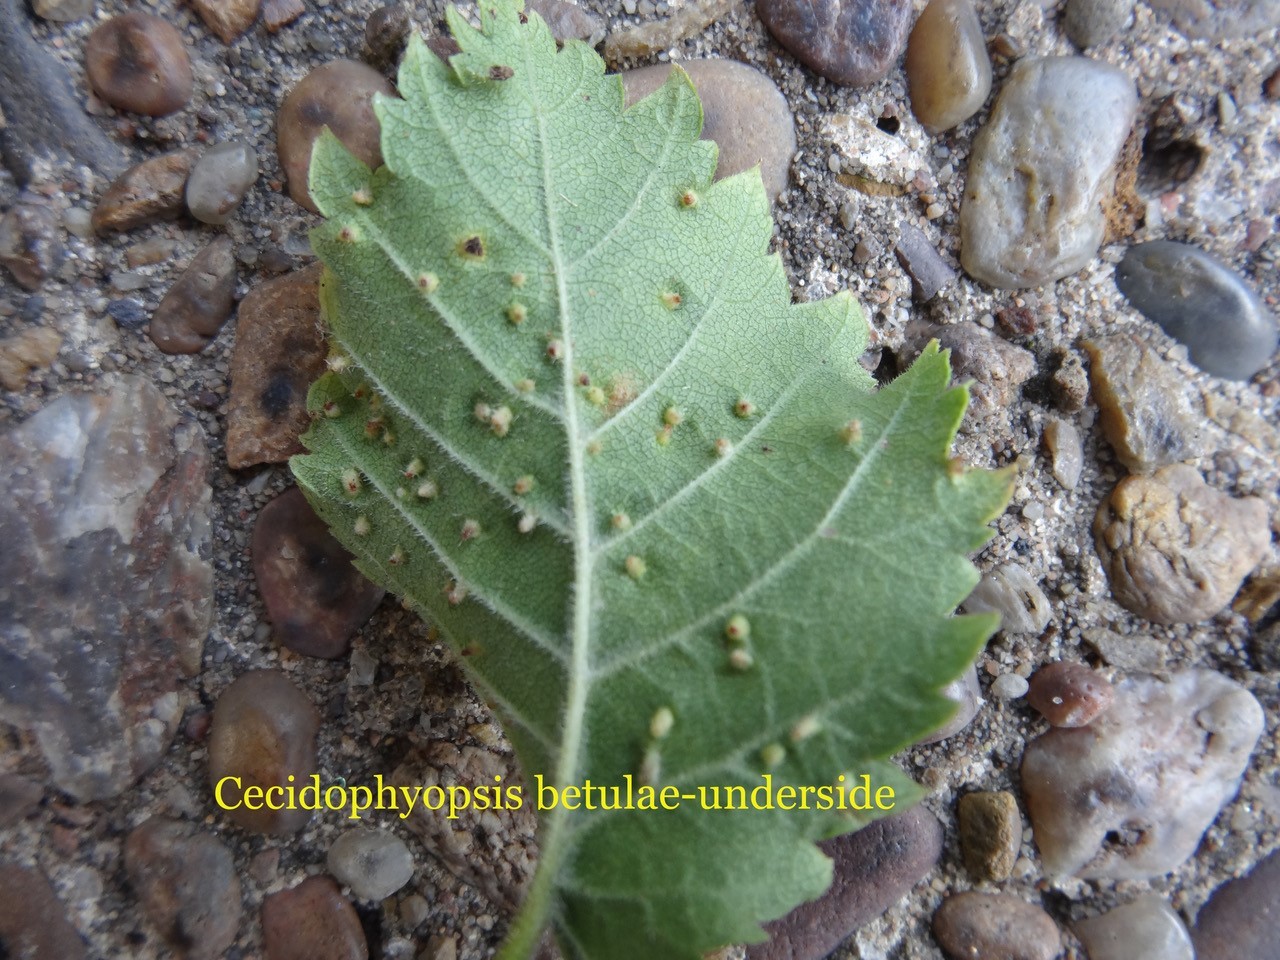 Cecidopyopsis betulae, a gall mite, on Silver Birch, Potteric Carr (lower surface).